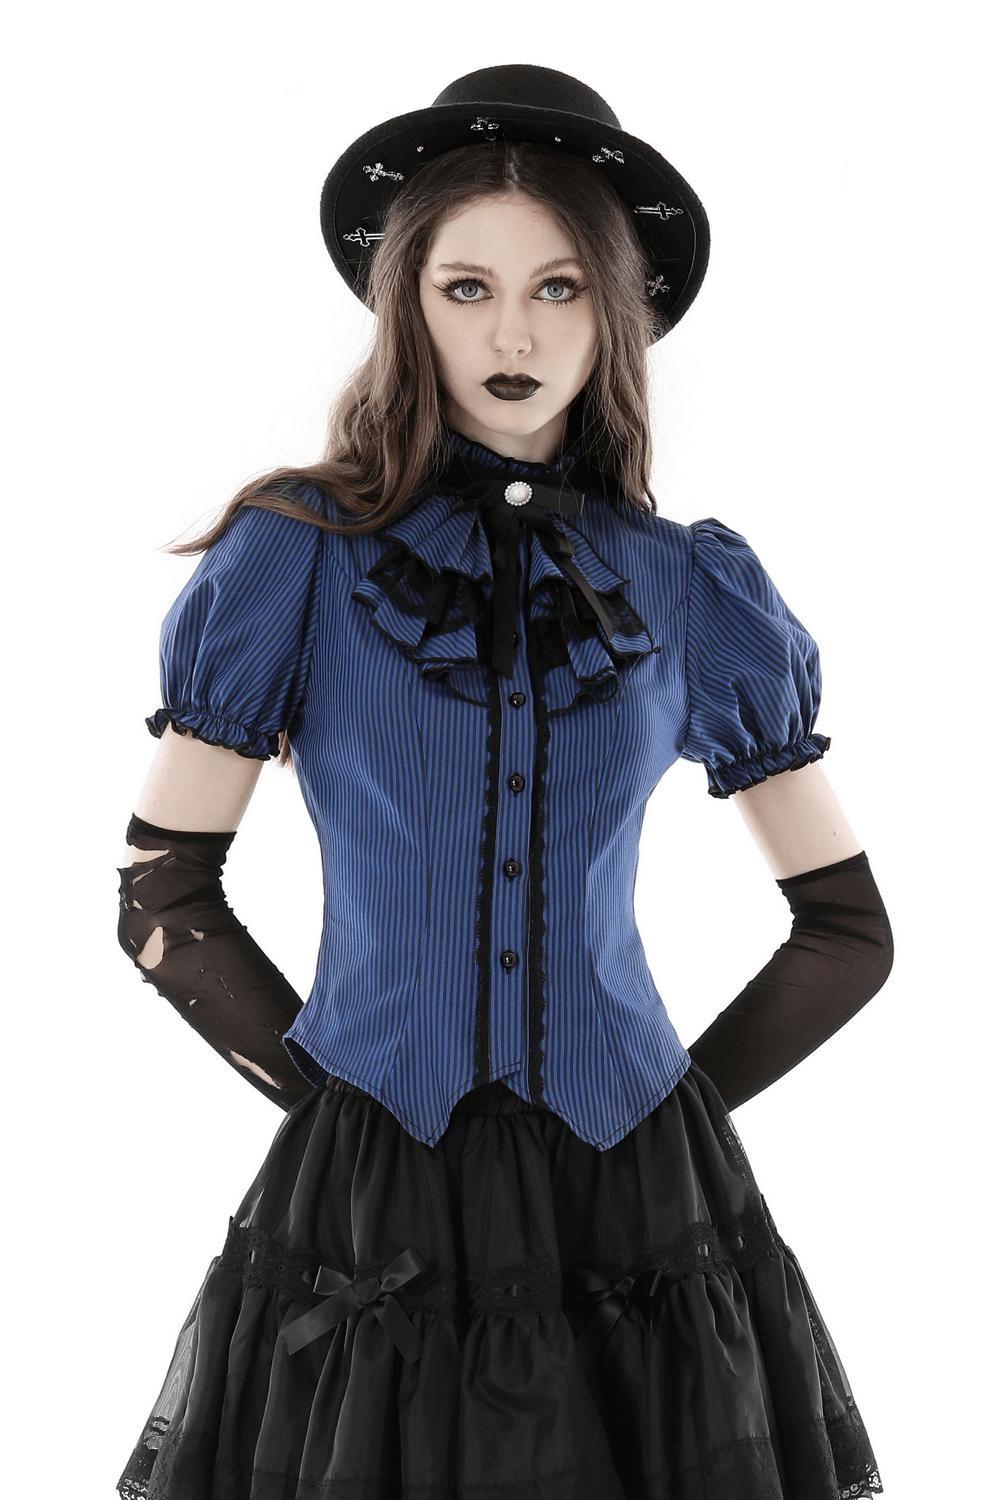 Dark Gothic Frilly Collar Striped Blouse With Black Lace Trim